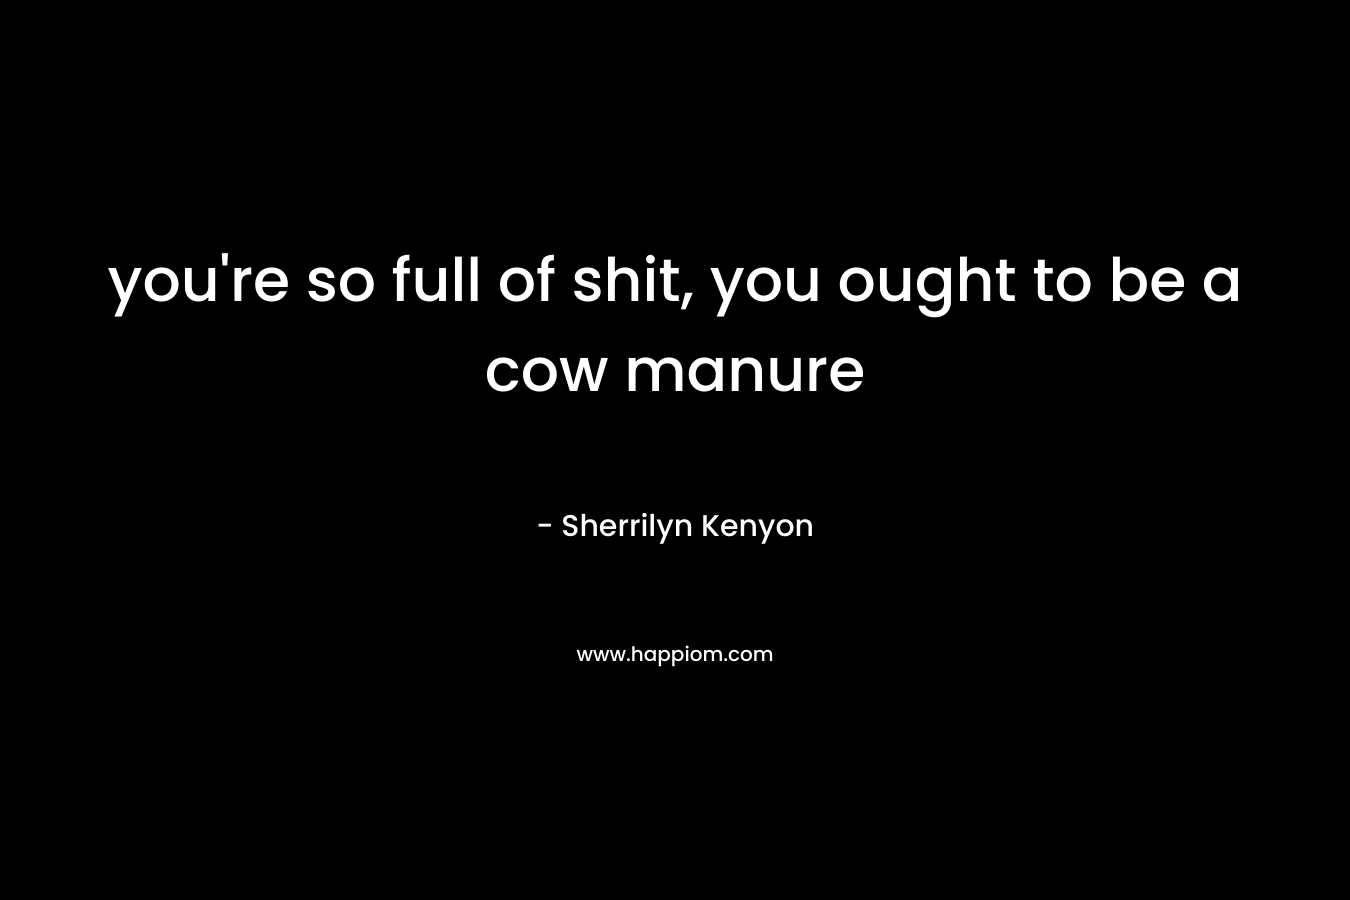 you're so full of shit, you ought to be a cow manure